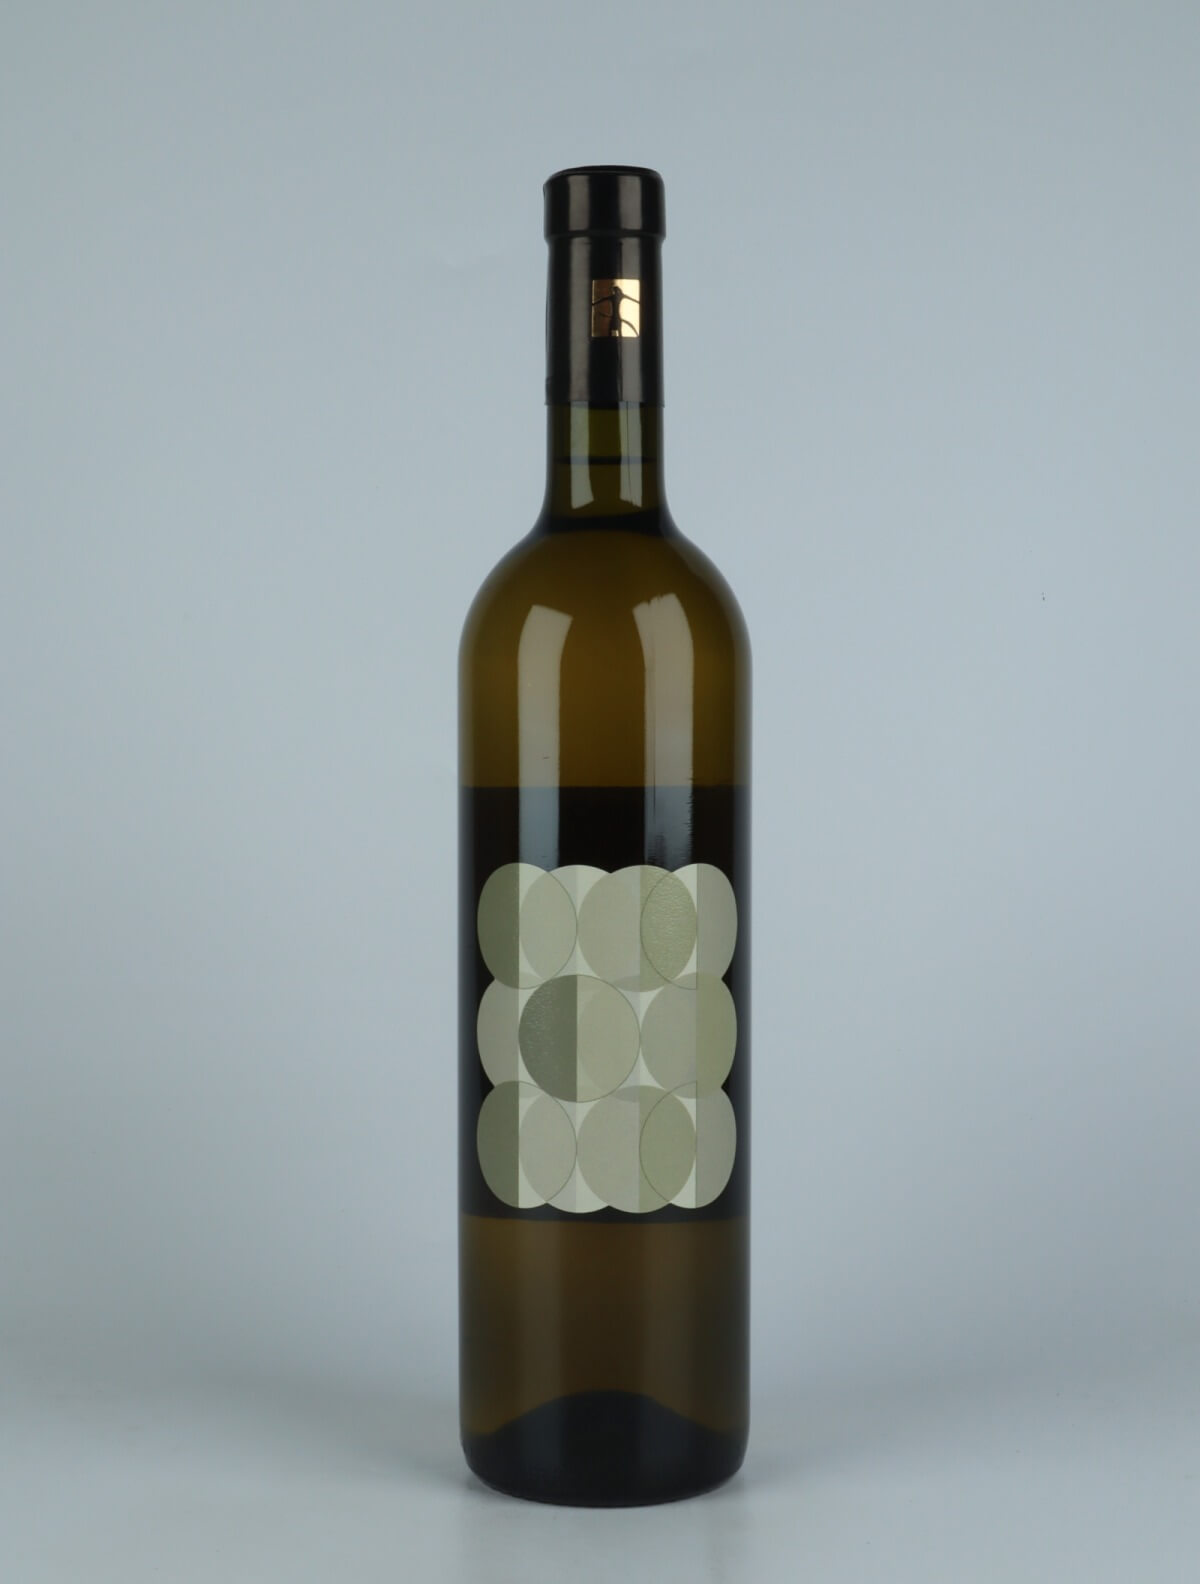 A bottle 2022 Selvadolce Bianco Orange wine from Tenuta Selvadolce, Liguria in Italy